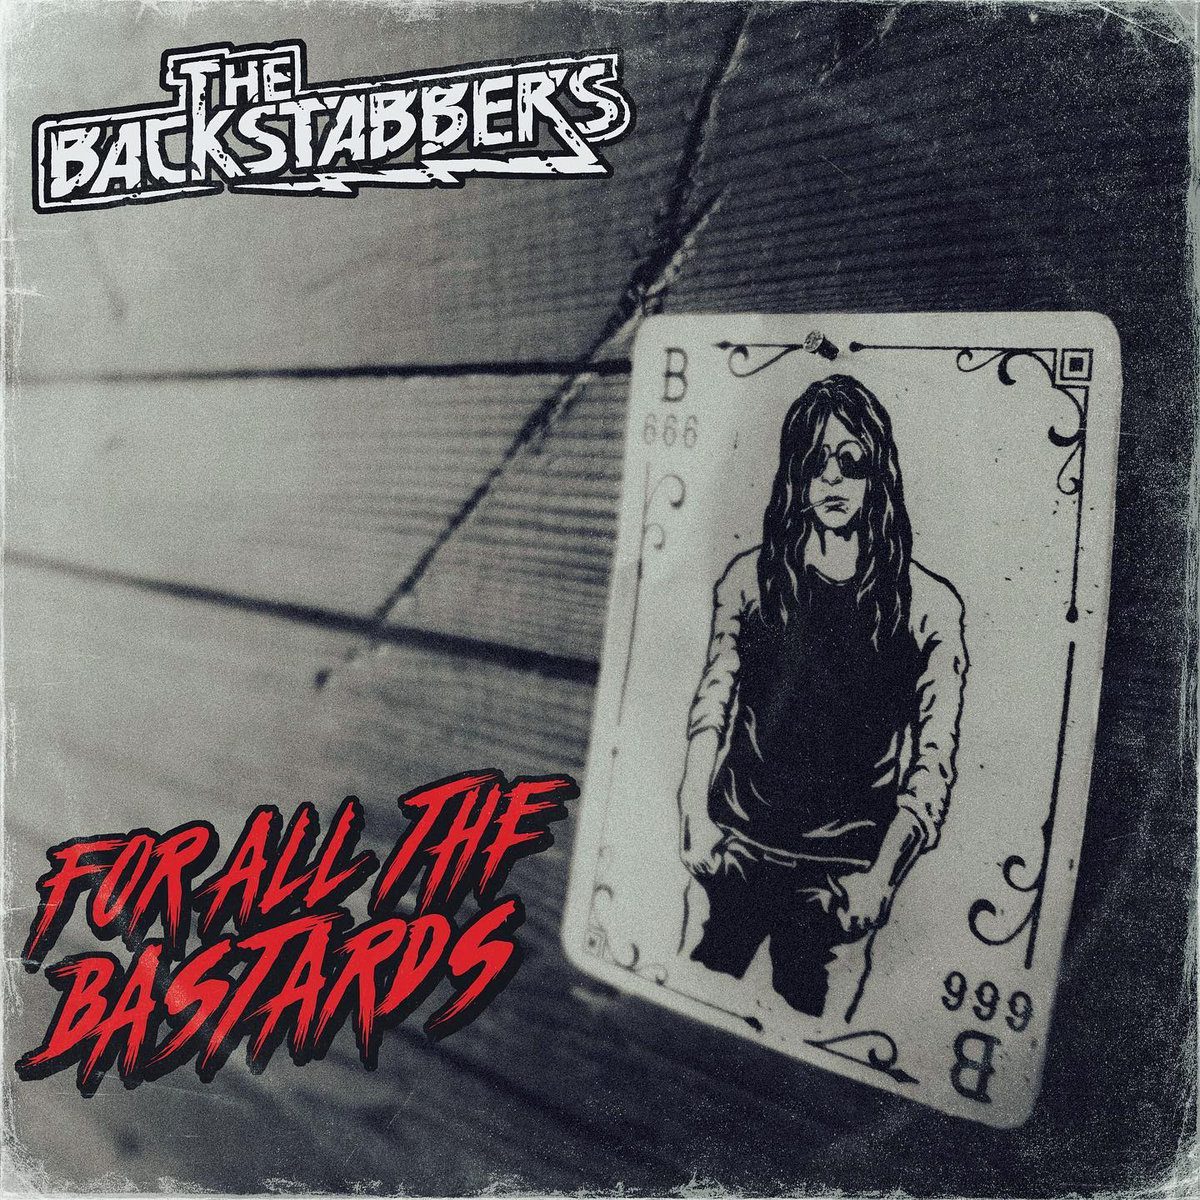 The Backstabbers – For All The Bastards (2022)